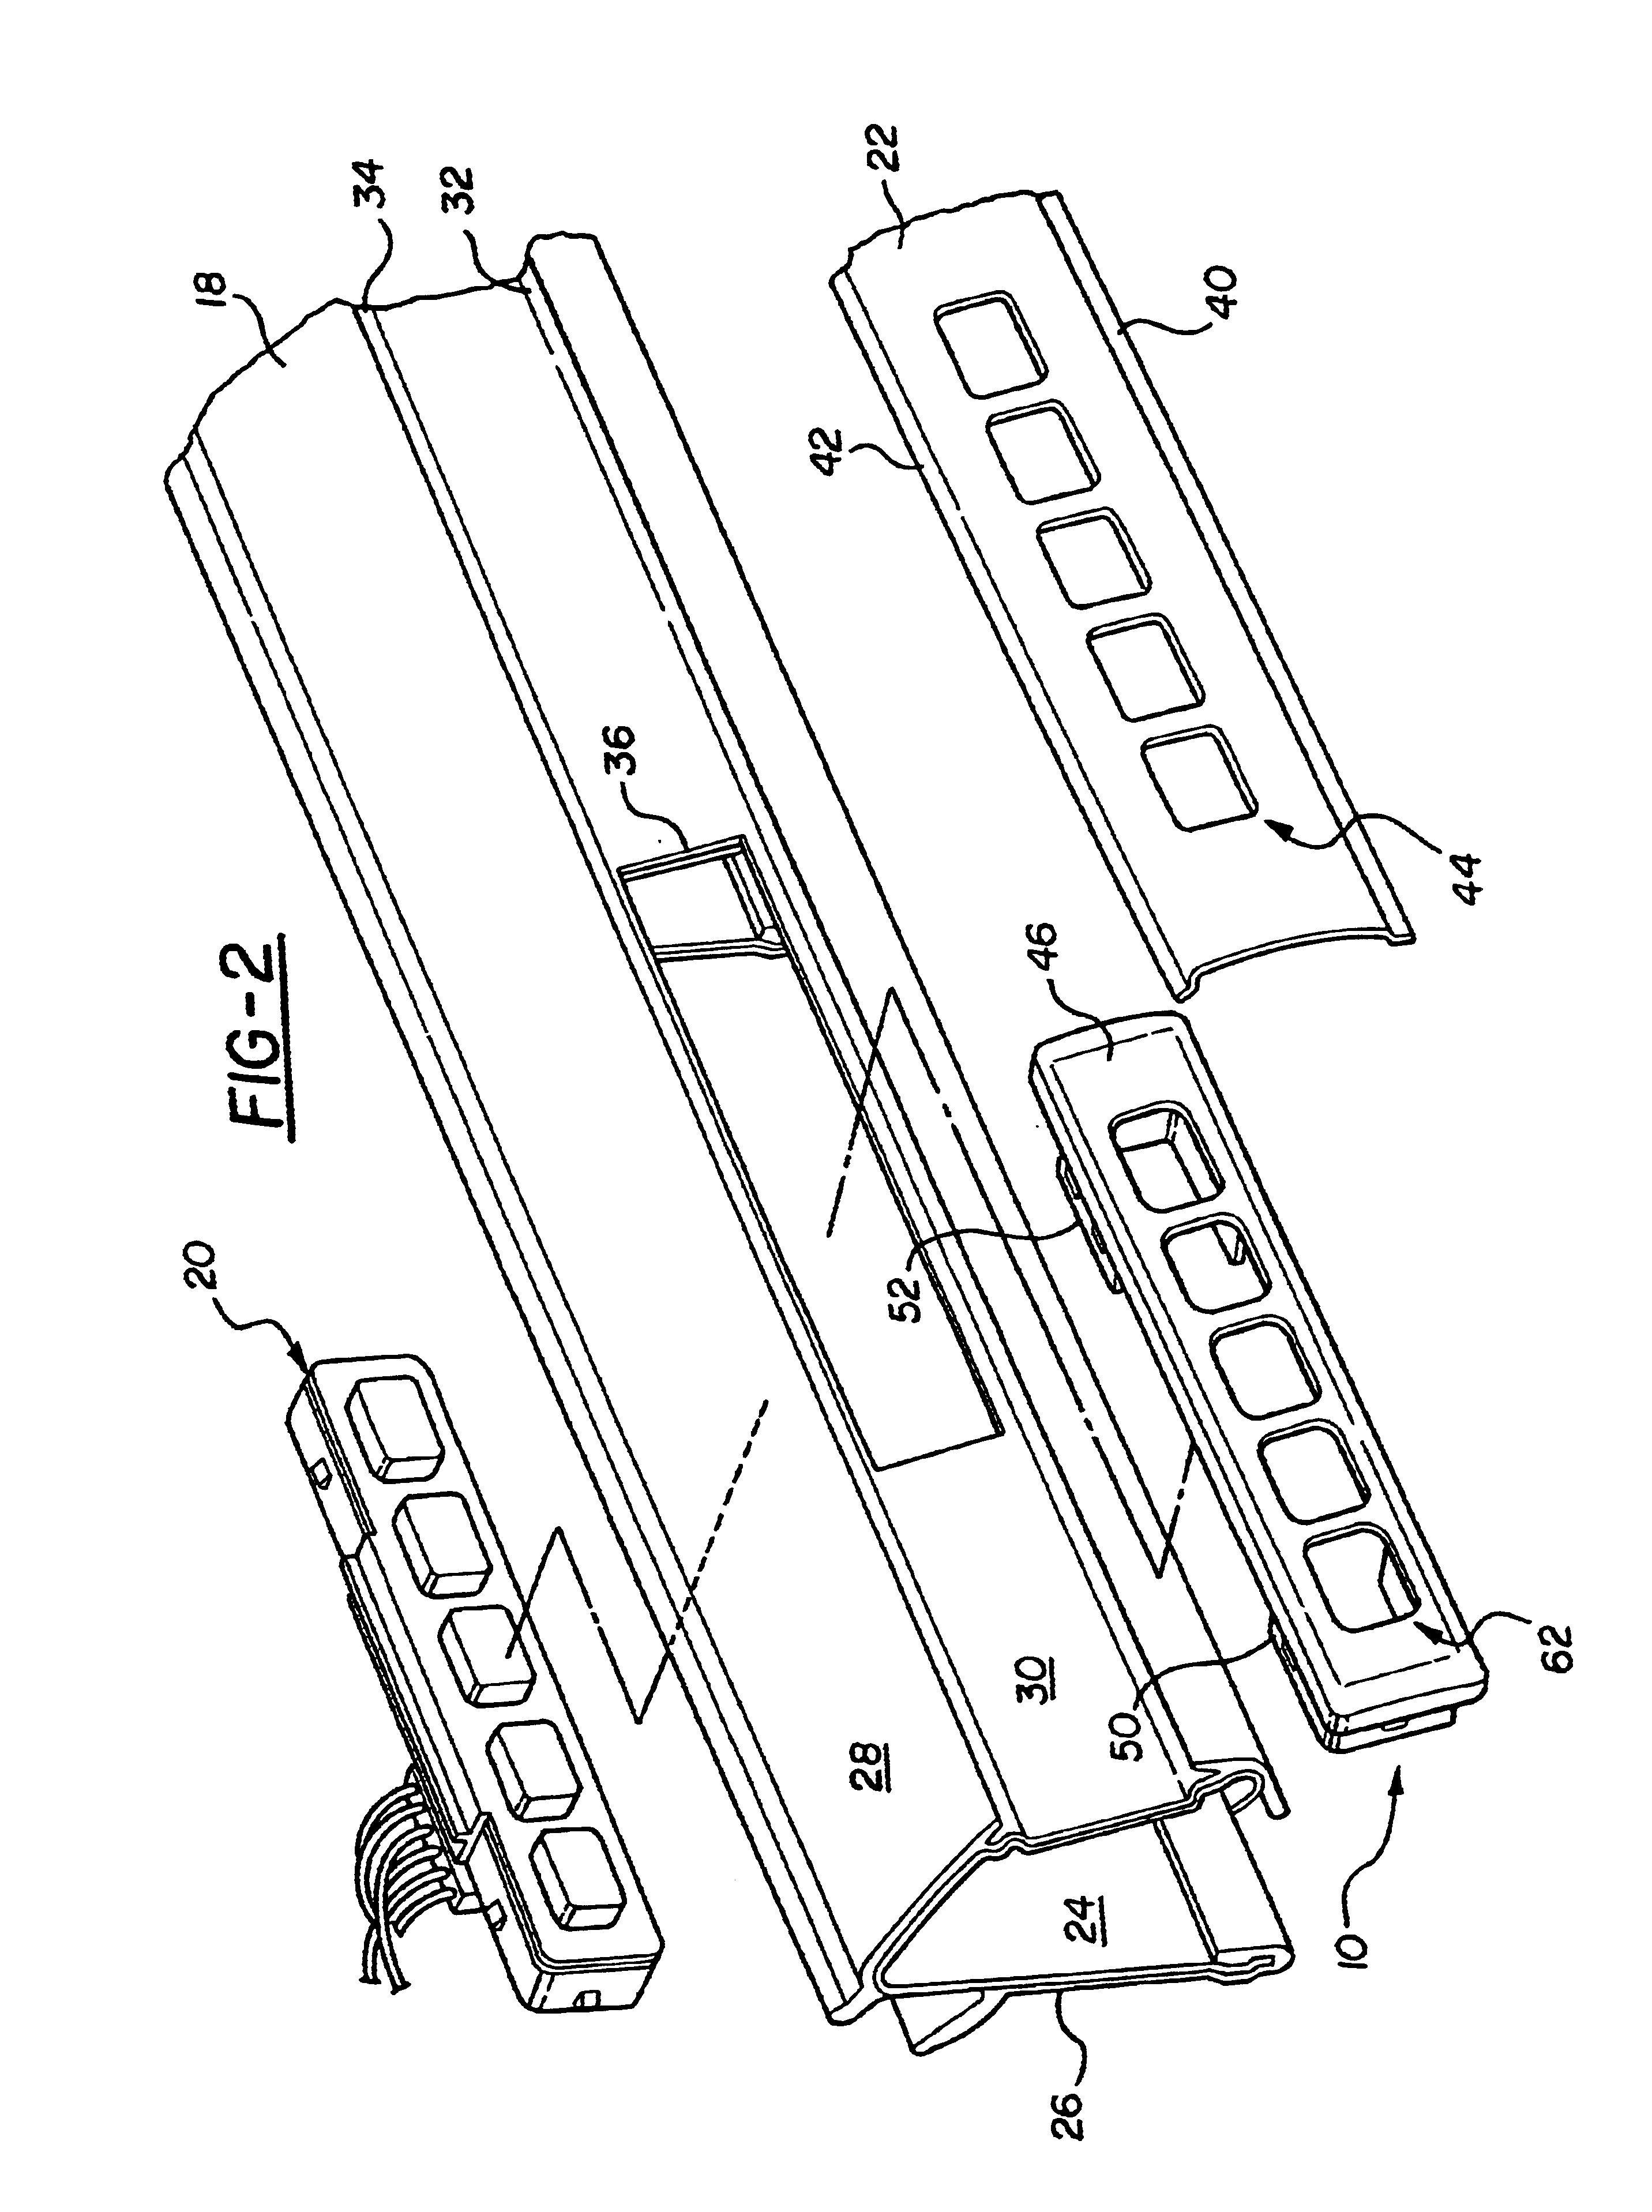 Retainer clip for attaching components to a belt molding